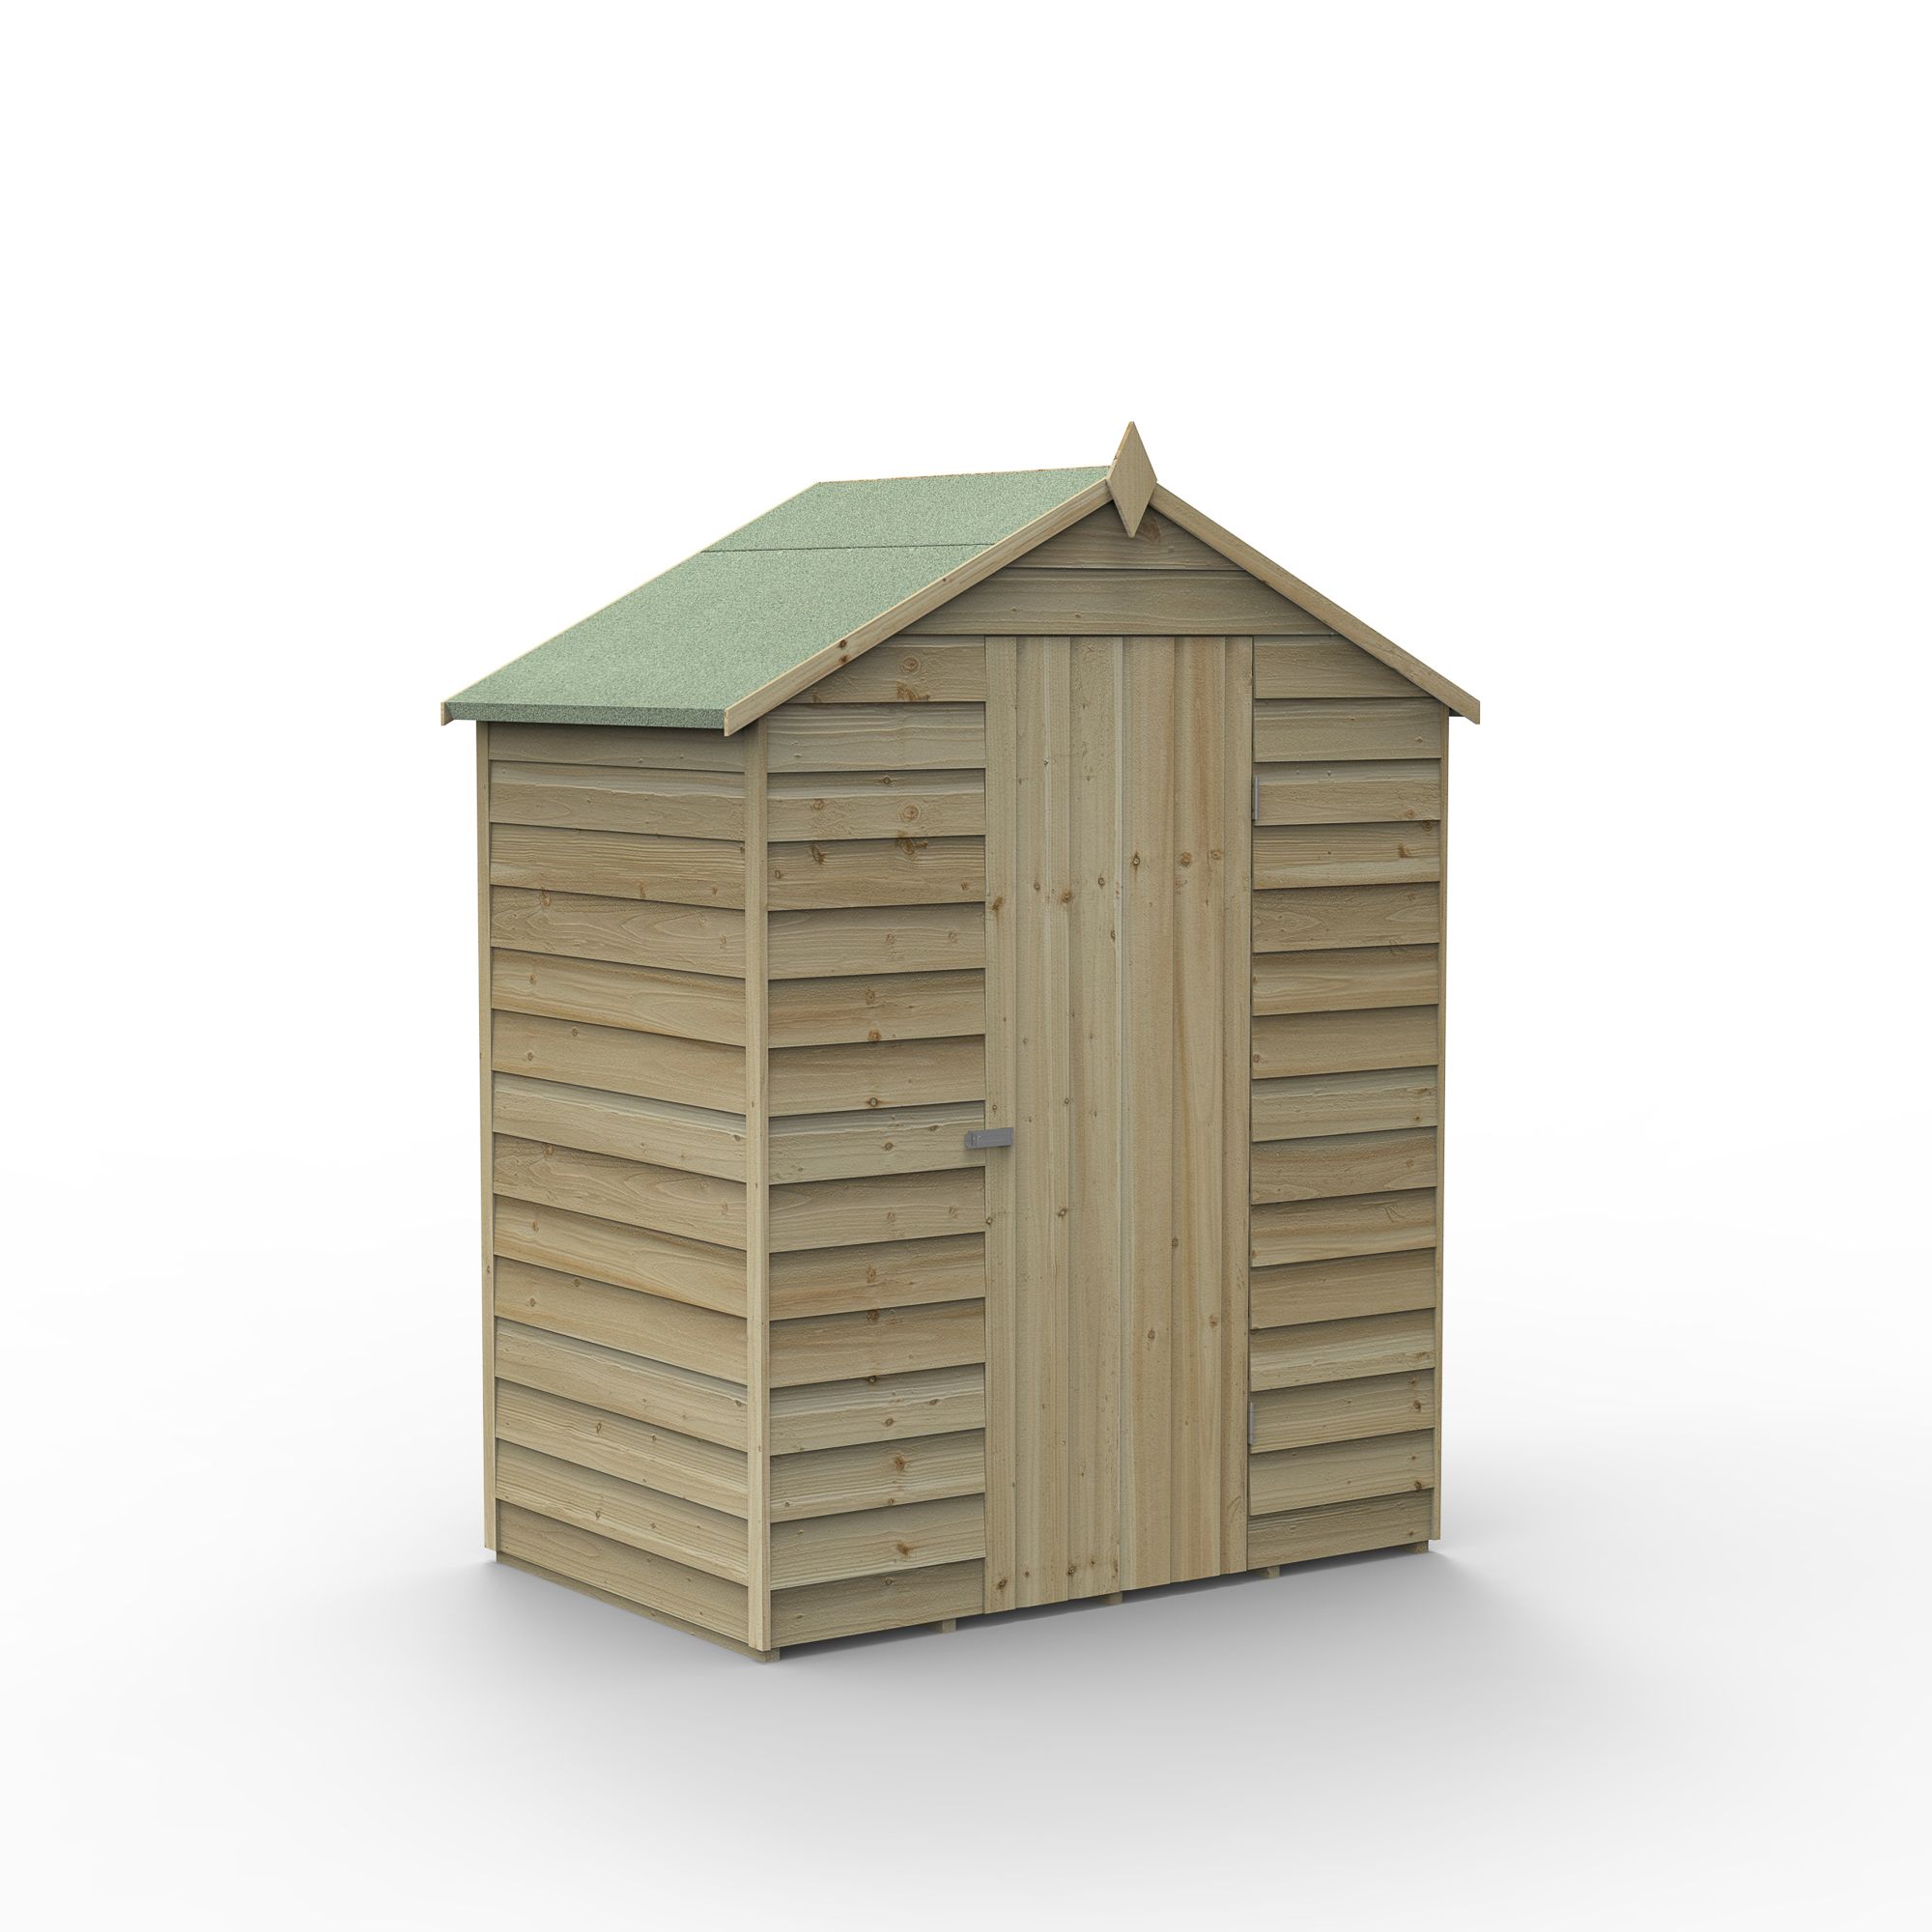 Forest Garden Overlap 5x3 ft Apex Wooden Pressure treated Shed with floor (Base included)